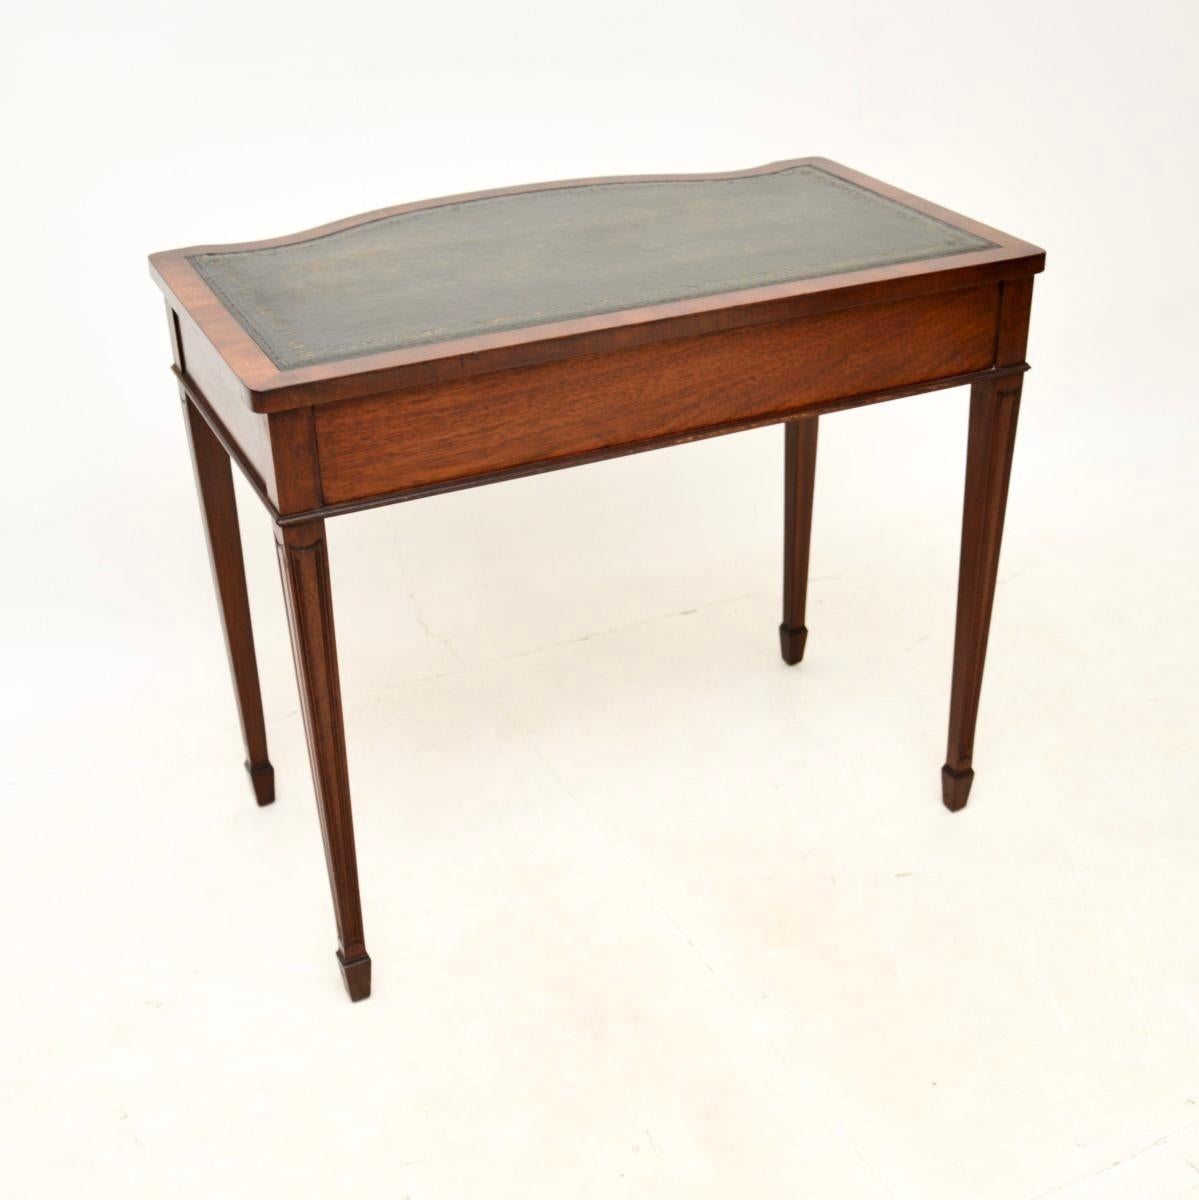 Mid-20th Century Antique Leather Top Desk / Console Table